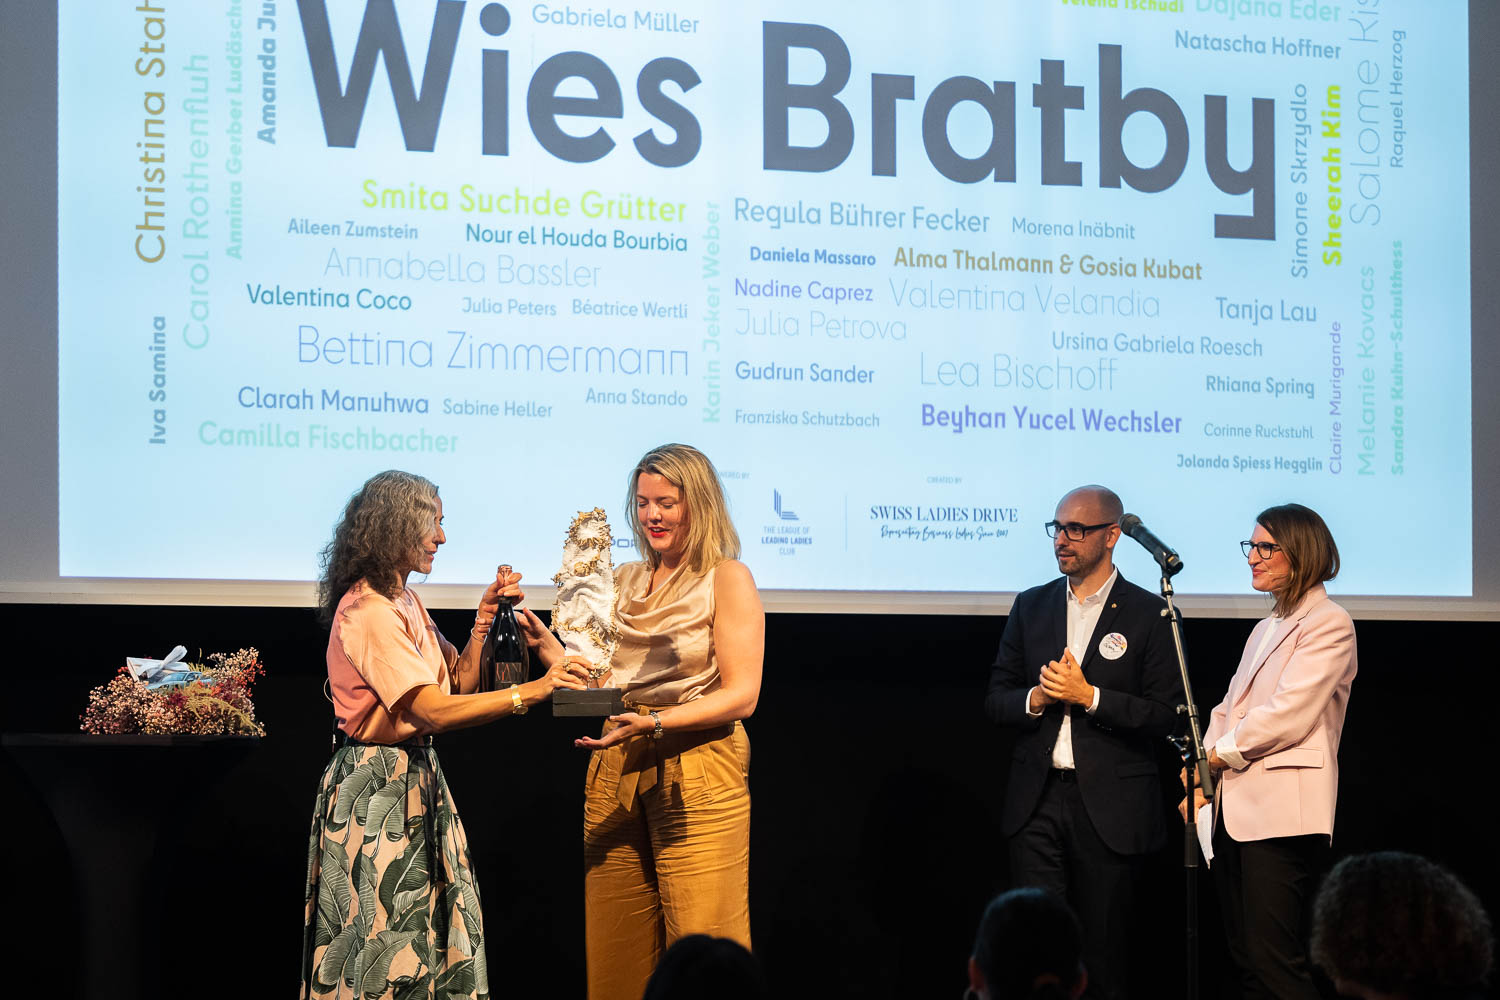 League of Leading Ladies Conference 2022 - Award Winner - Wies Bratby